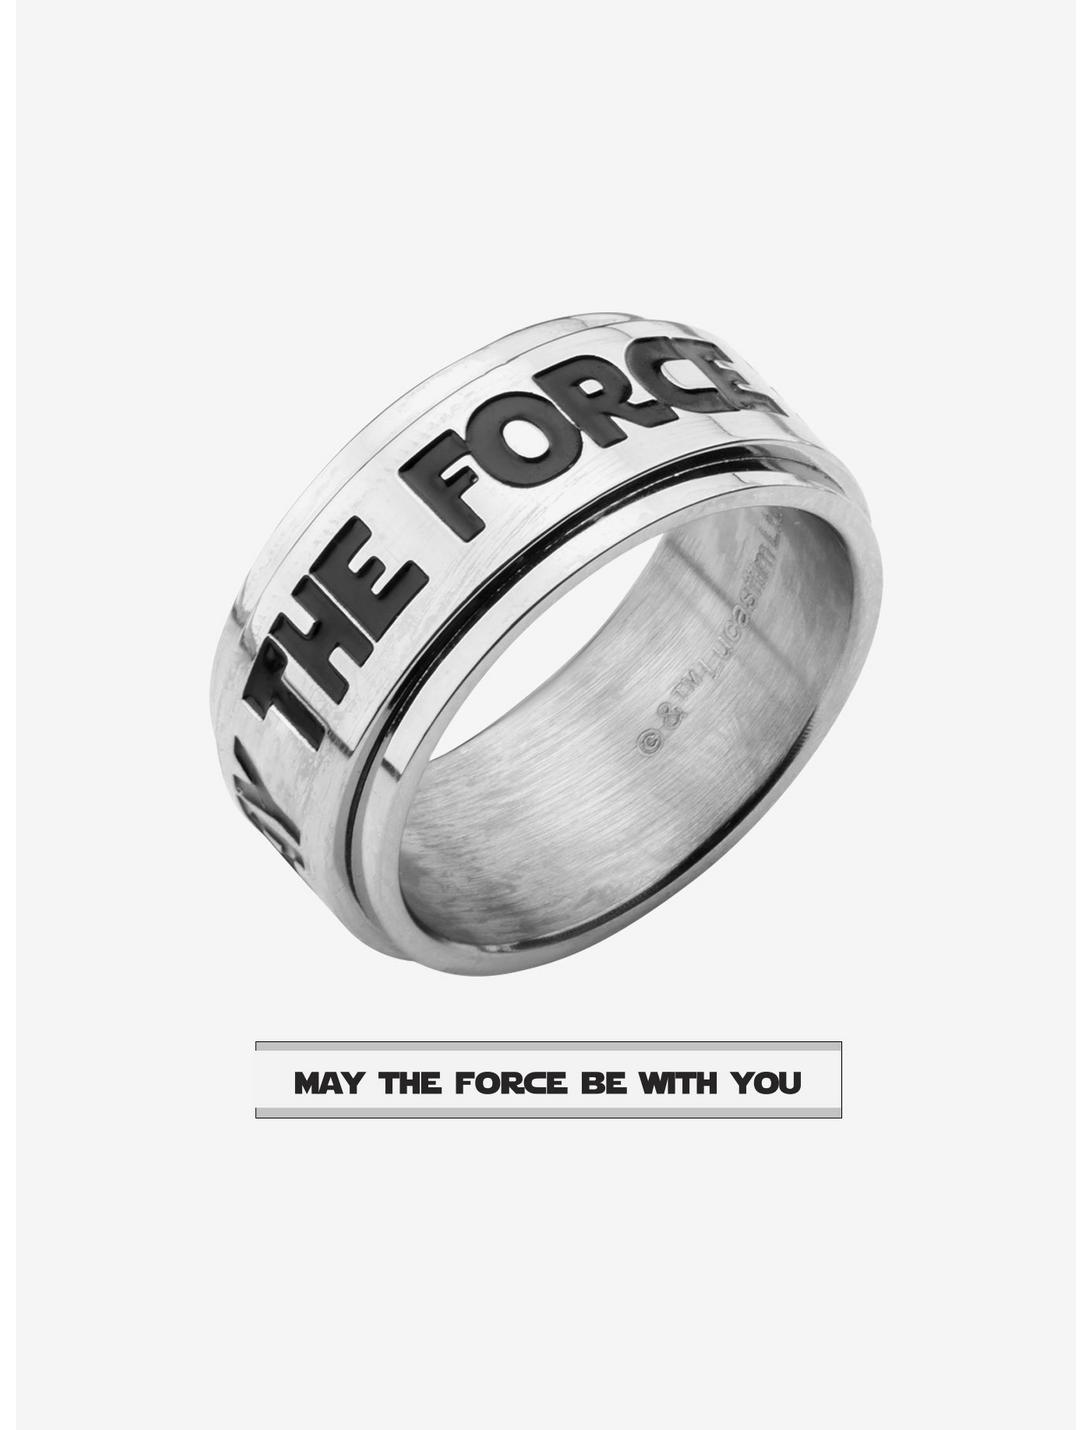 Star Wars "MAY THE FORCE BE WITH YOU" Spinner Ring, SILVER, hi-res